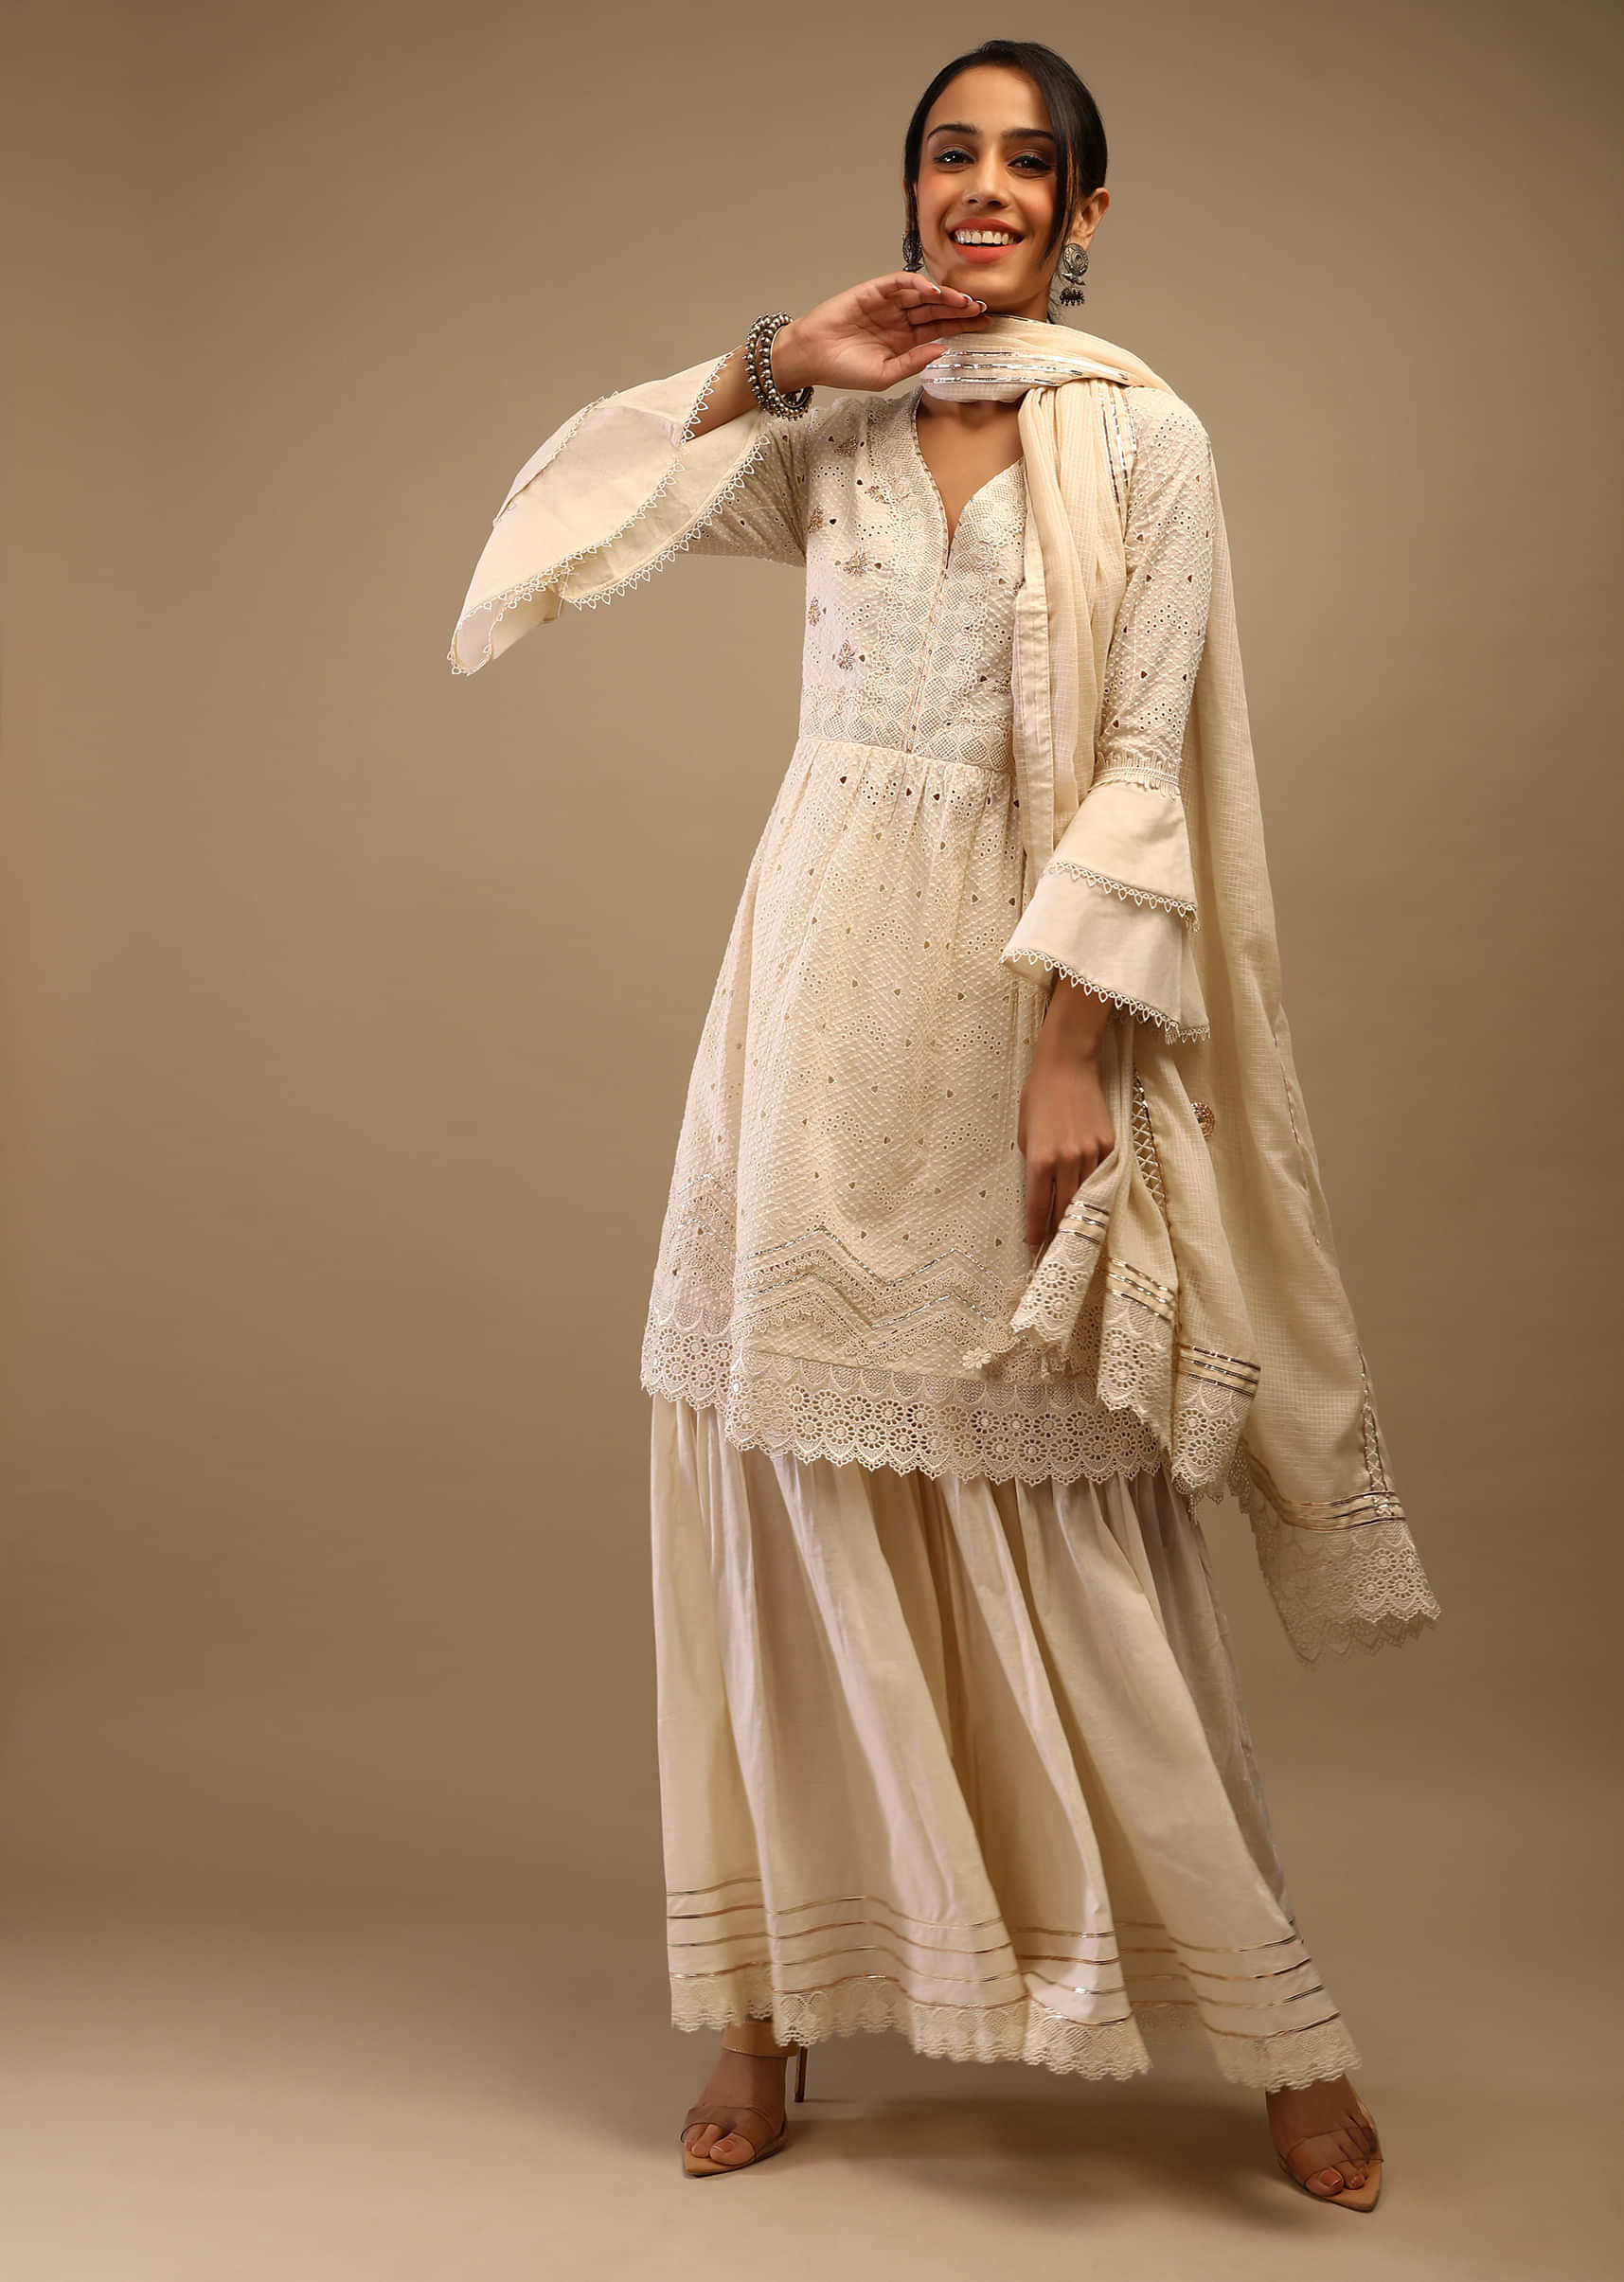 Off White Sharara Suit In Cotton With Thread Cut Work Embroidered Geometric Design And Mirror Accents  